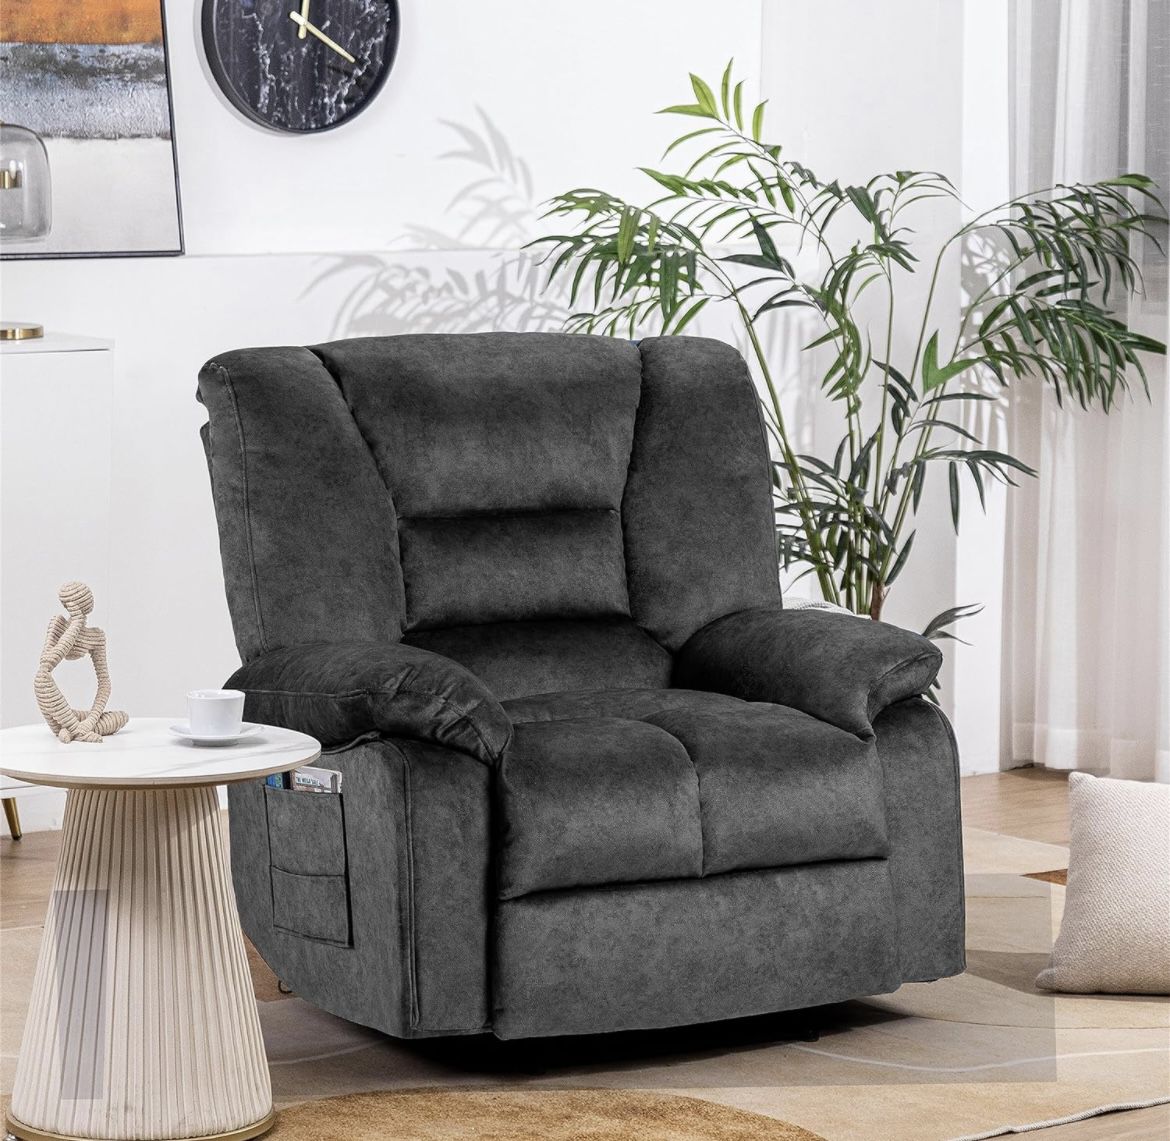 Oversized Recliner Chair Sofa with Massage and Heating, Living Room Chair with Side Pockets, Lazy Sofa Chairs with Remote Control and Cup Holders(Grey